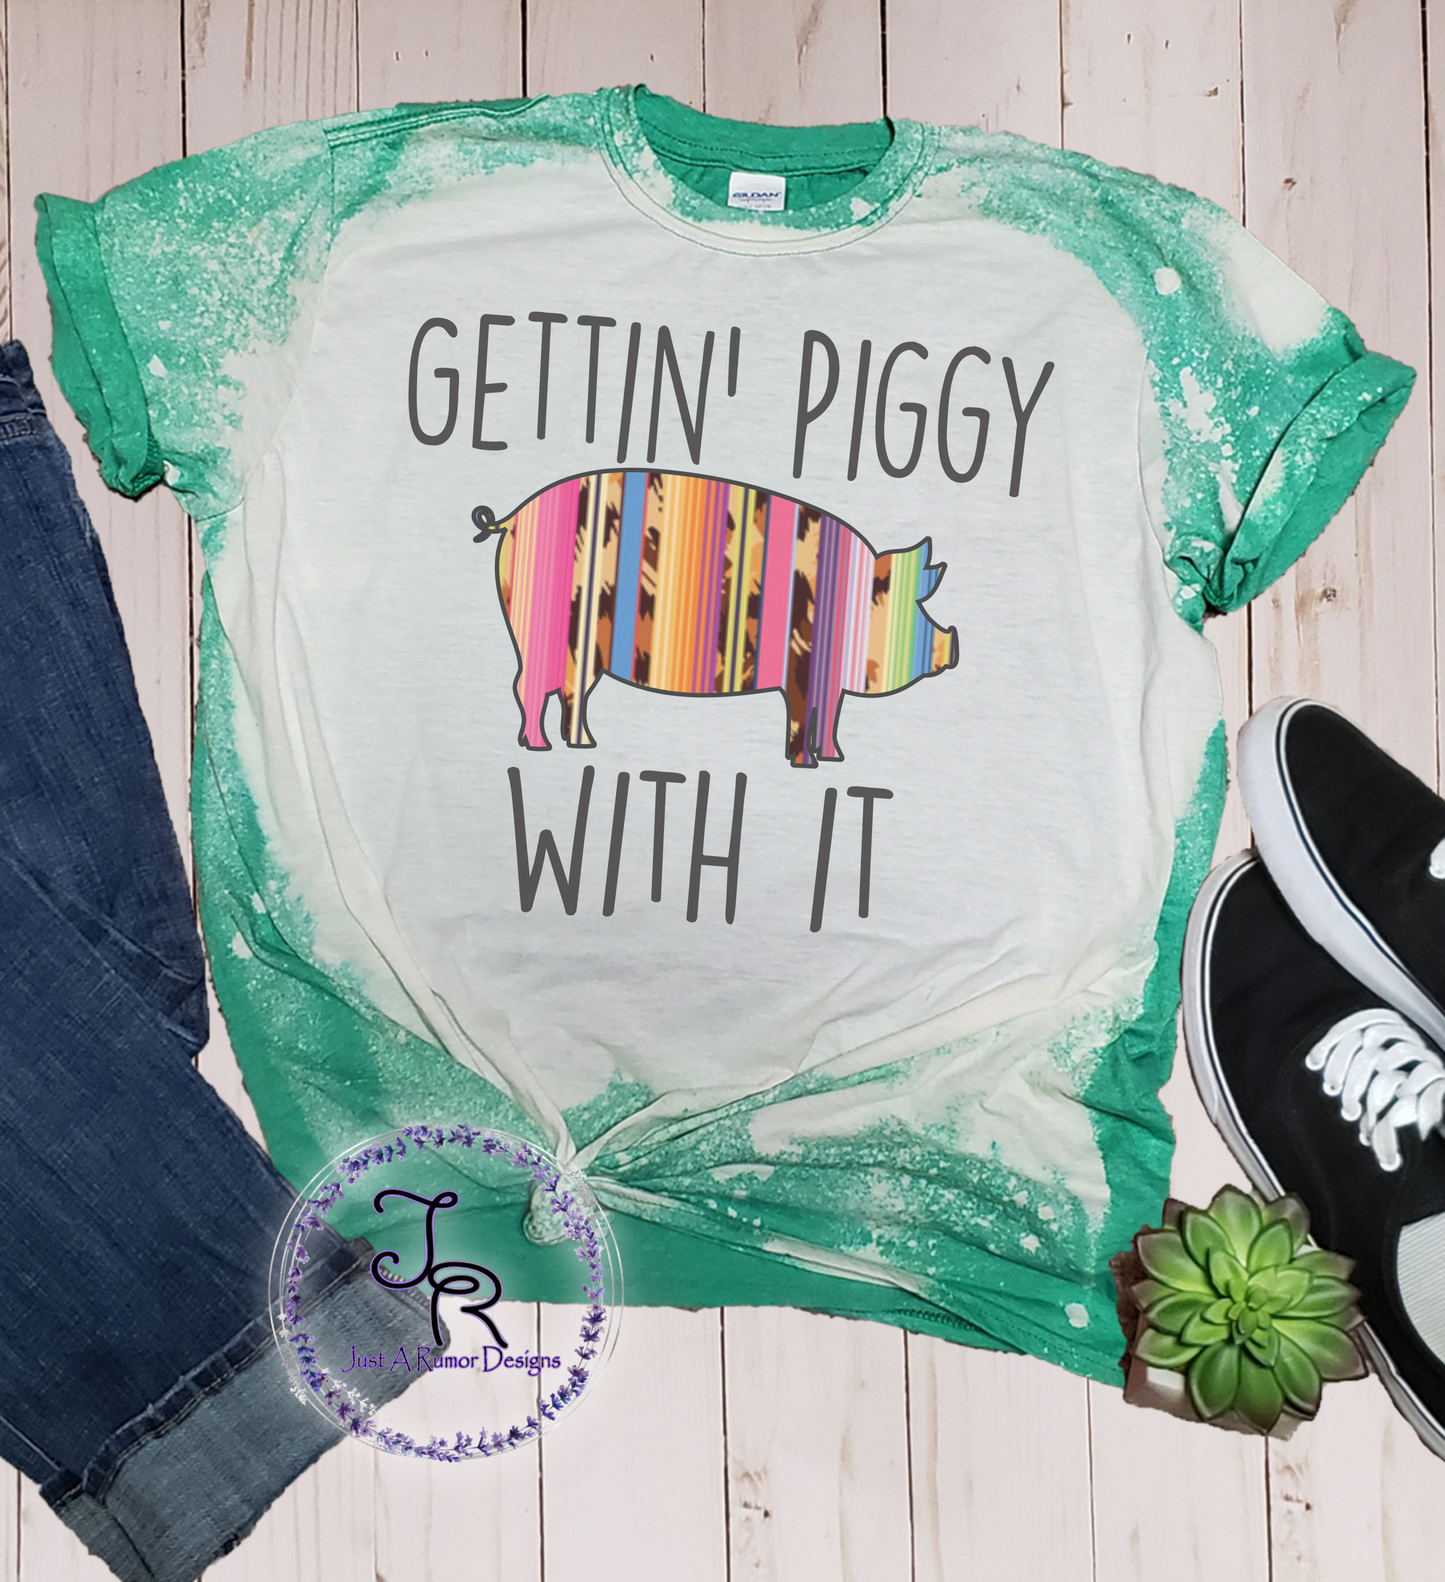 Getting Piggy With It Shirt